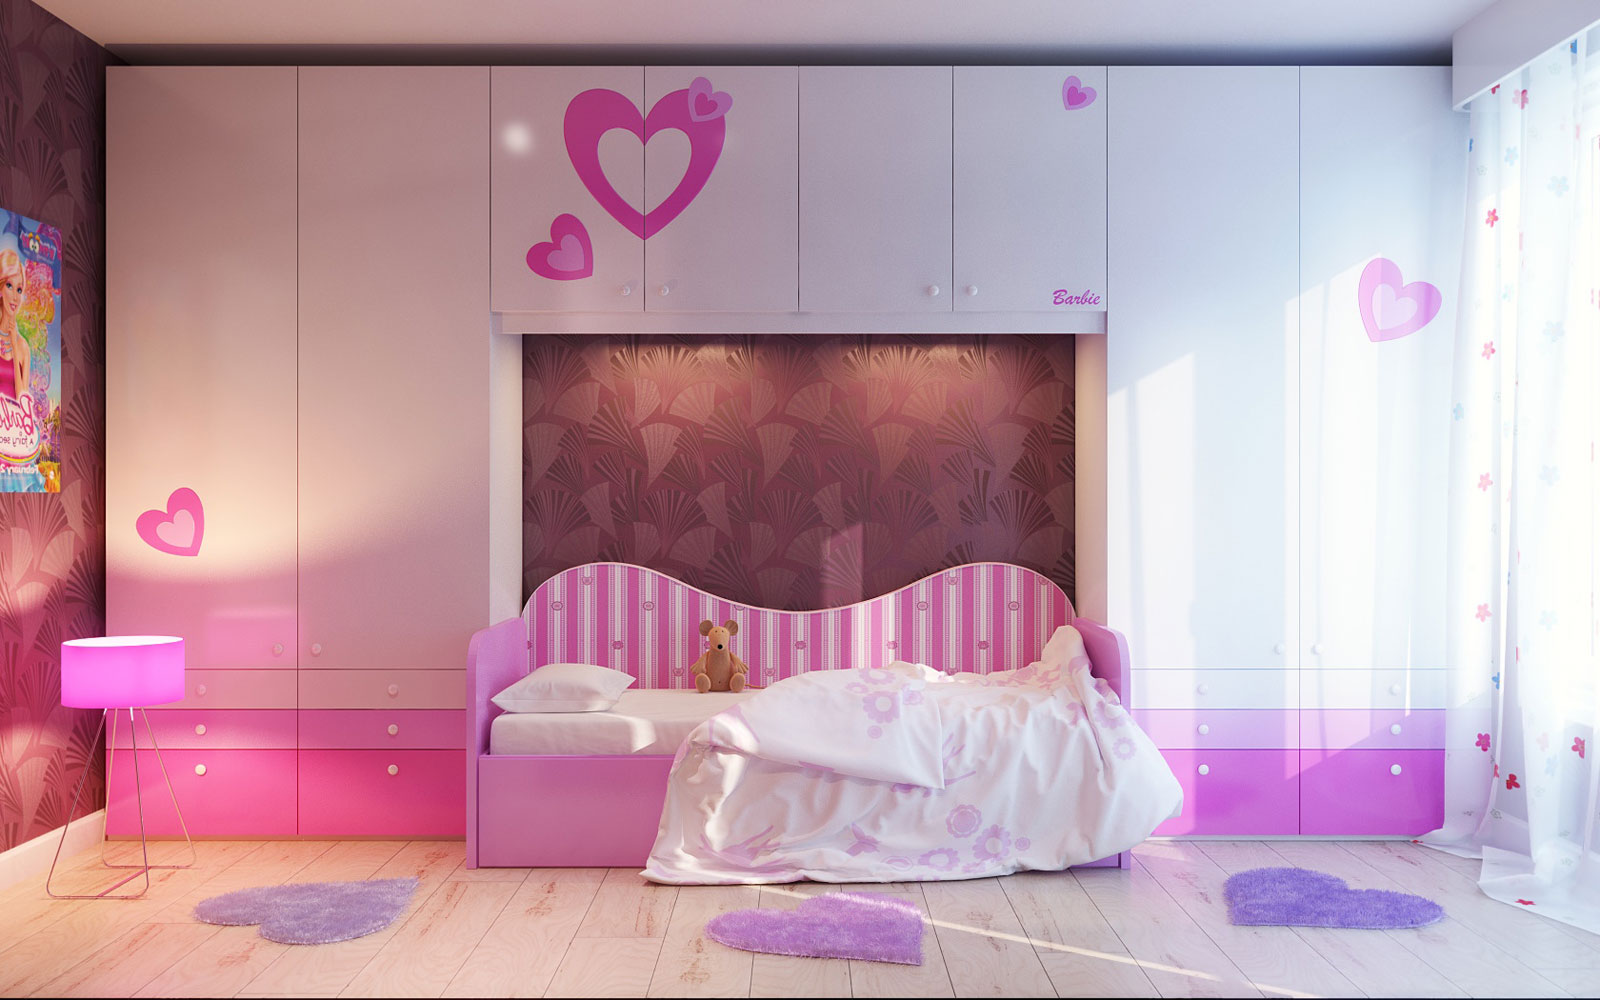 White Pink Ideas Charming White Pink Cute Bedroom Ideas Applying Wooden Flooring Design Furnished With Single Bed Combined With Cupboard Completed With Flooring Stand Lighting And Amusing Rugs Bedroom Cute Bedroom Ideas For Enhancing House Interior